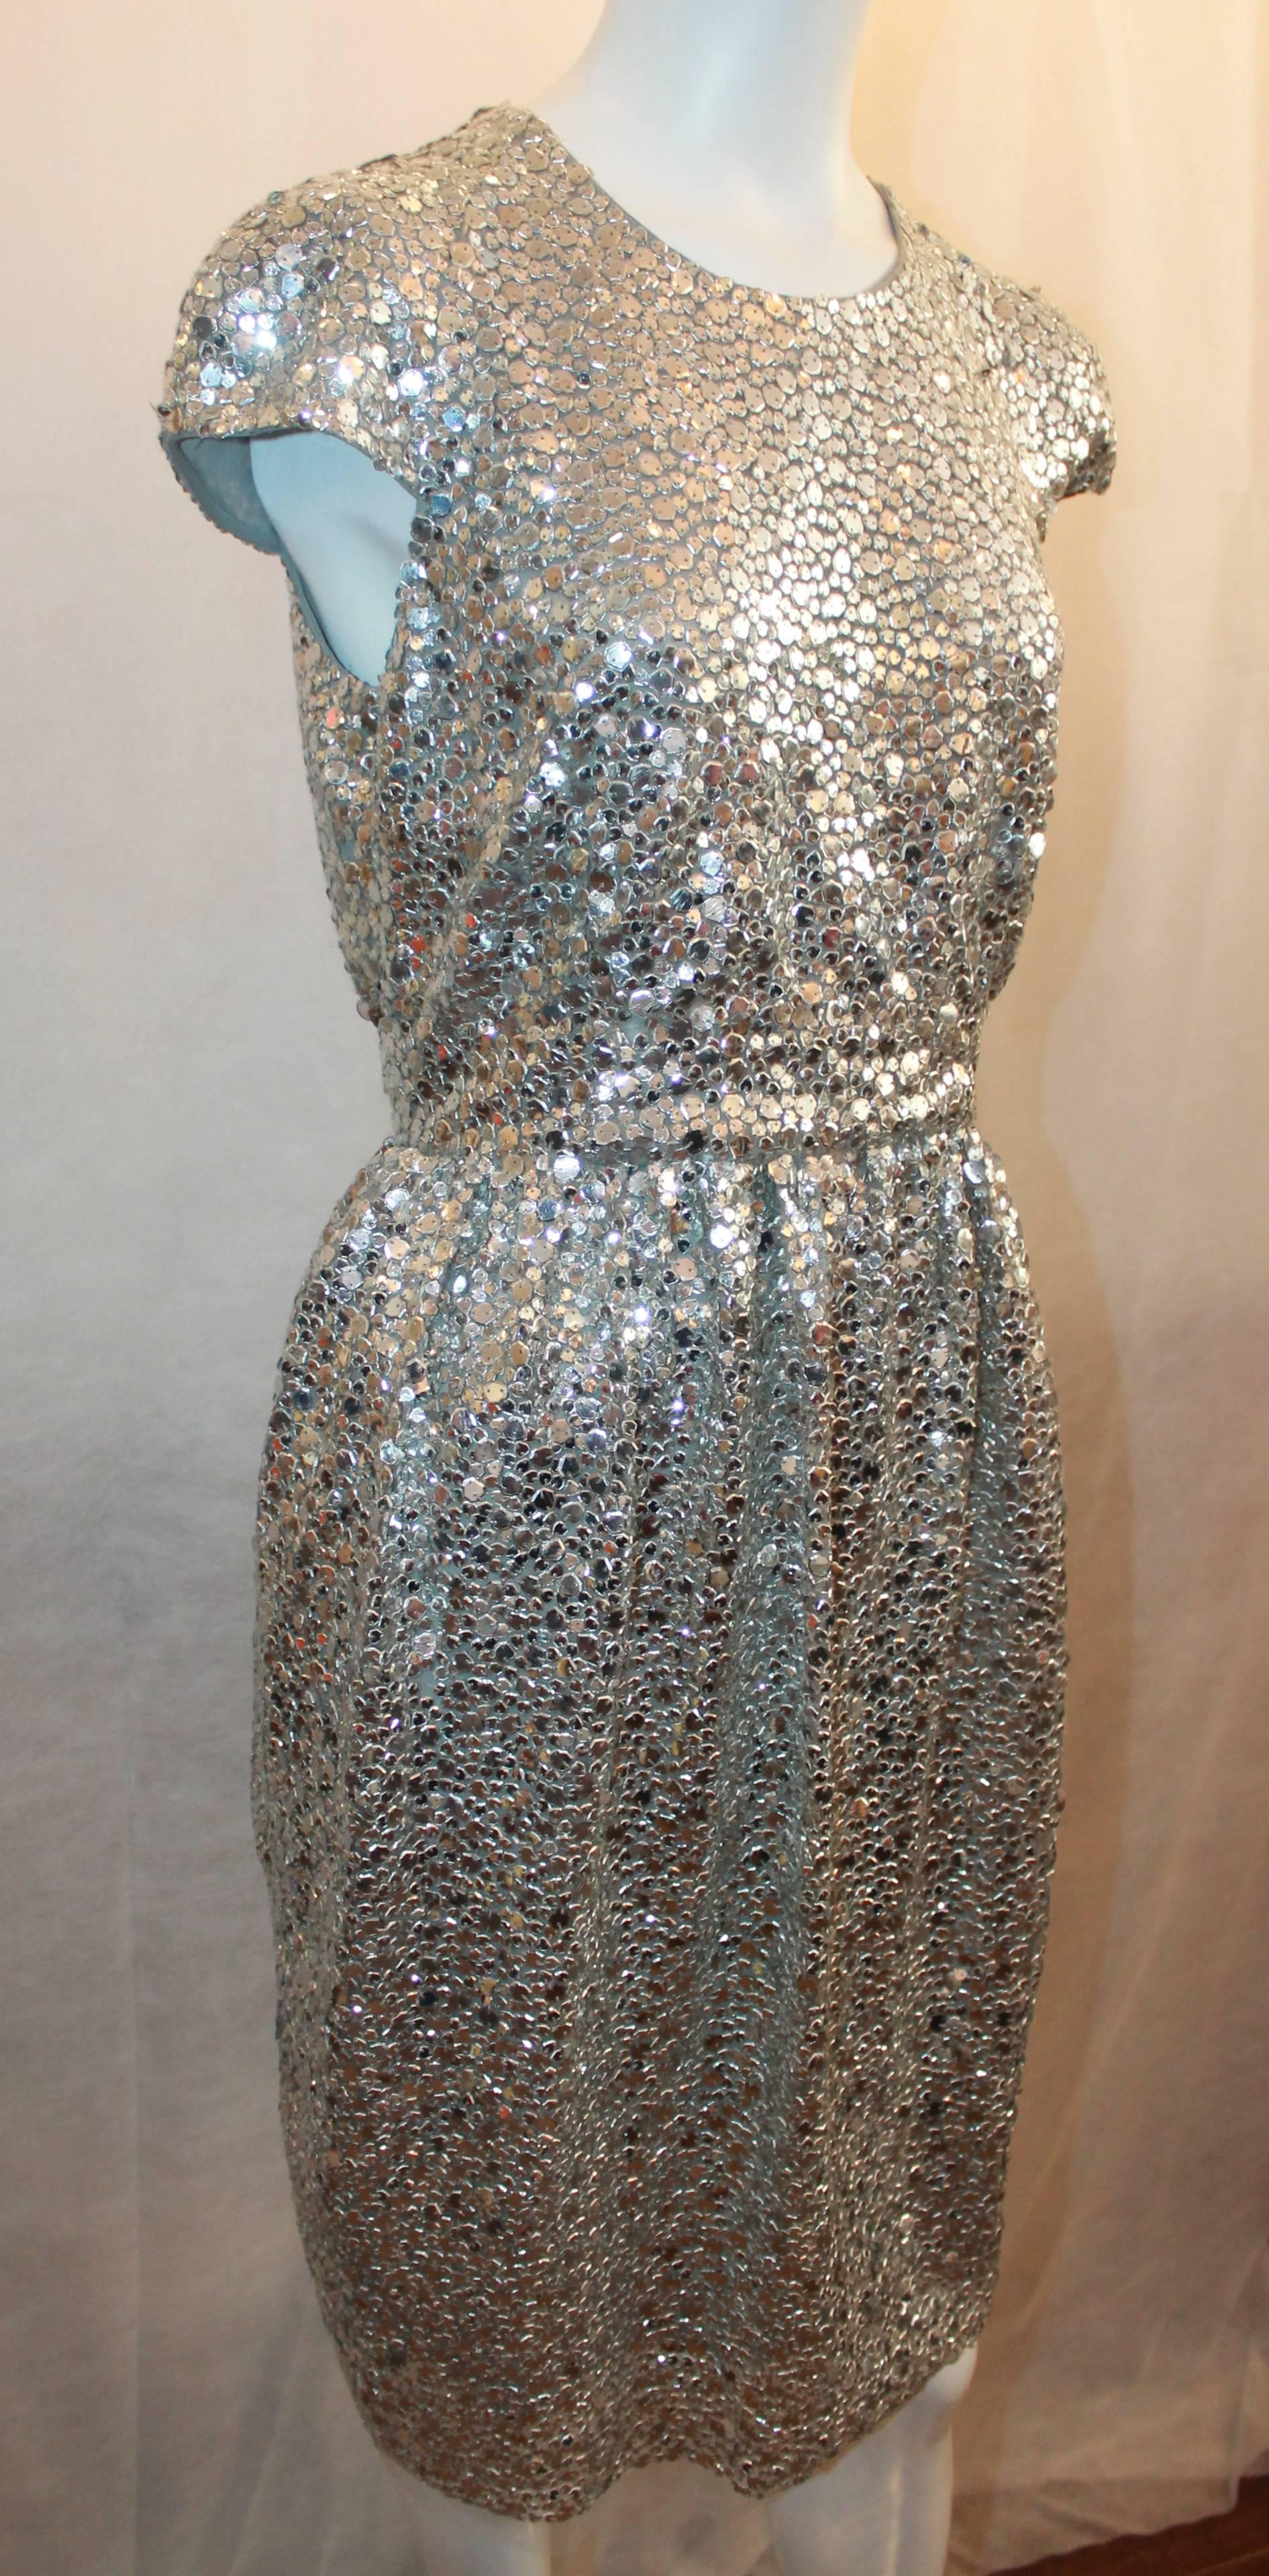 Naeem Khan Silver Silk & Mesh Sequin Short Sleeve Dress w/ Cinched Waist - 8.  This gorgeous dress is in very good condition with only some seuqins starting to come loose.  This Naeem Khan piece features edgy silver sequins throughout, a cinched